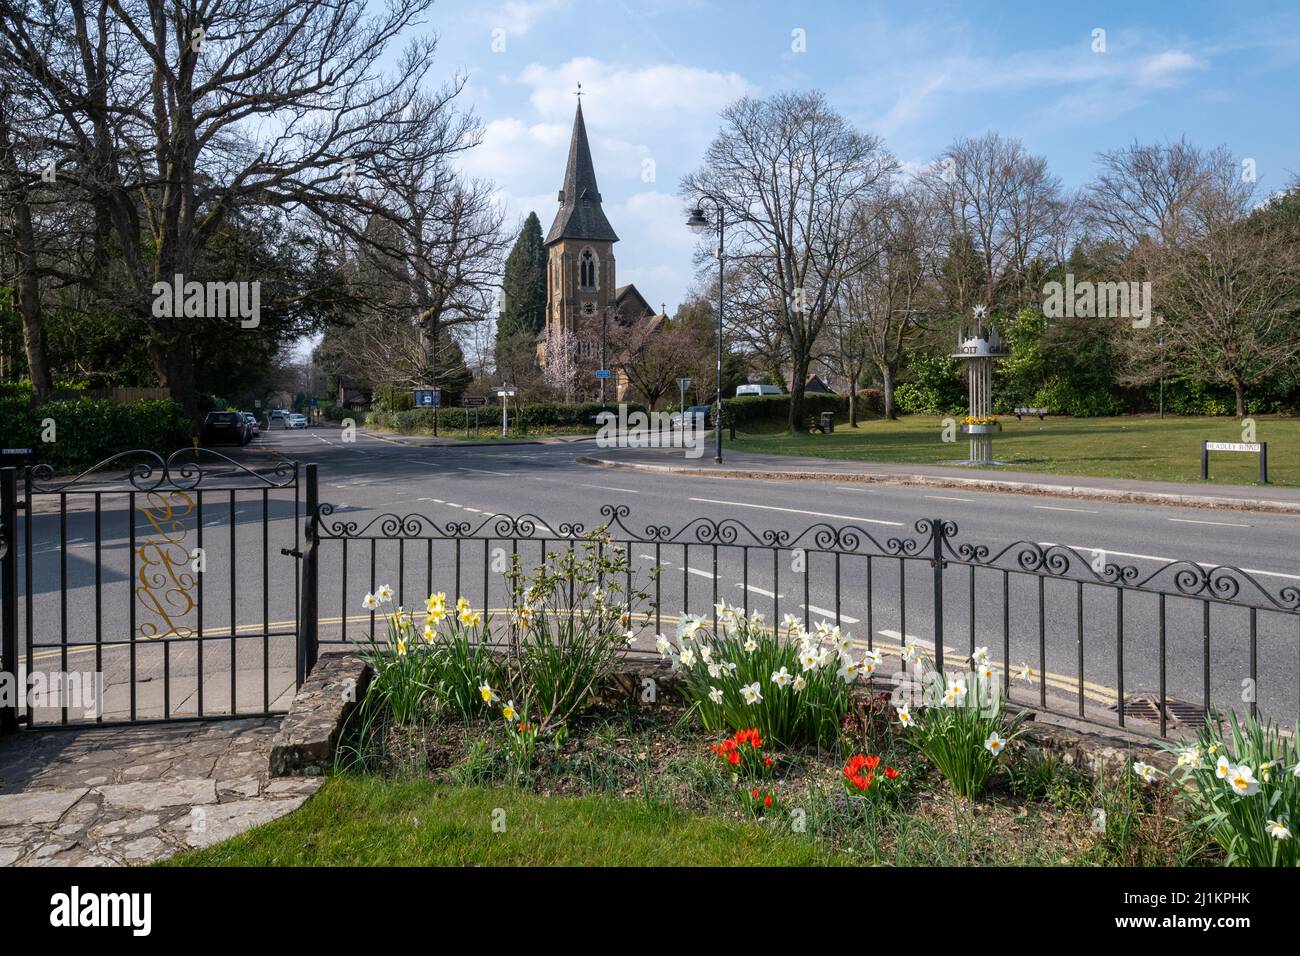 St Lukes Church in Grayshott village, Hampshire, England, UK, view from the war memorial garden with spring flowers Stock Photo